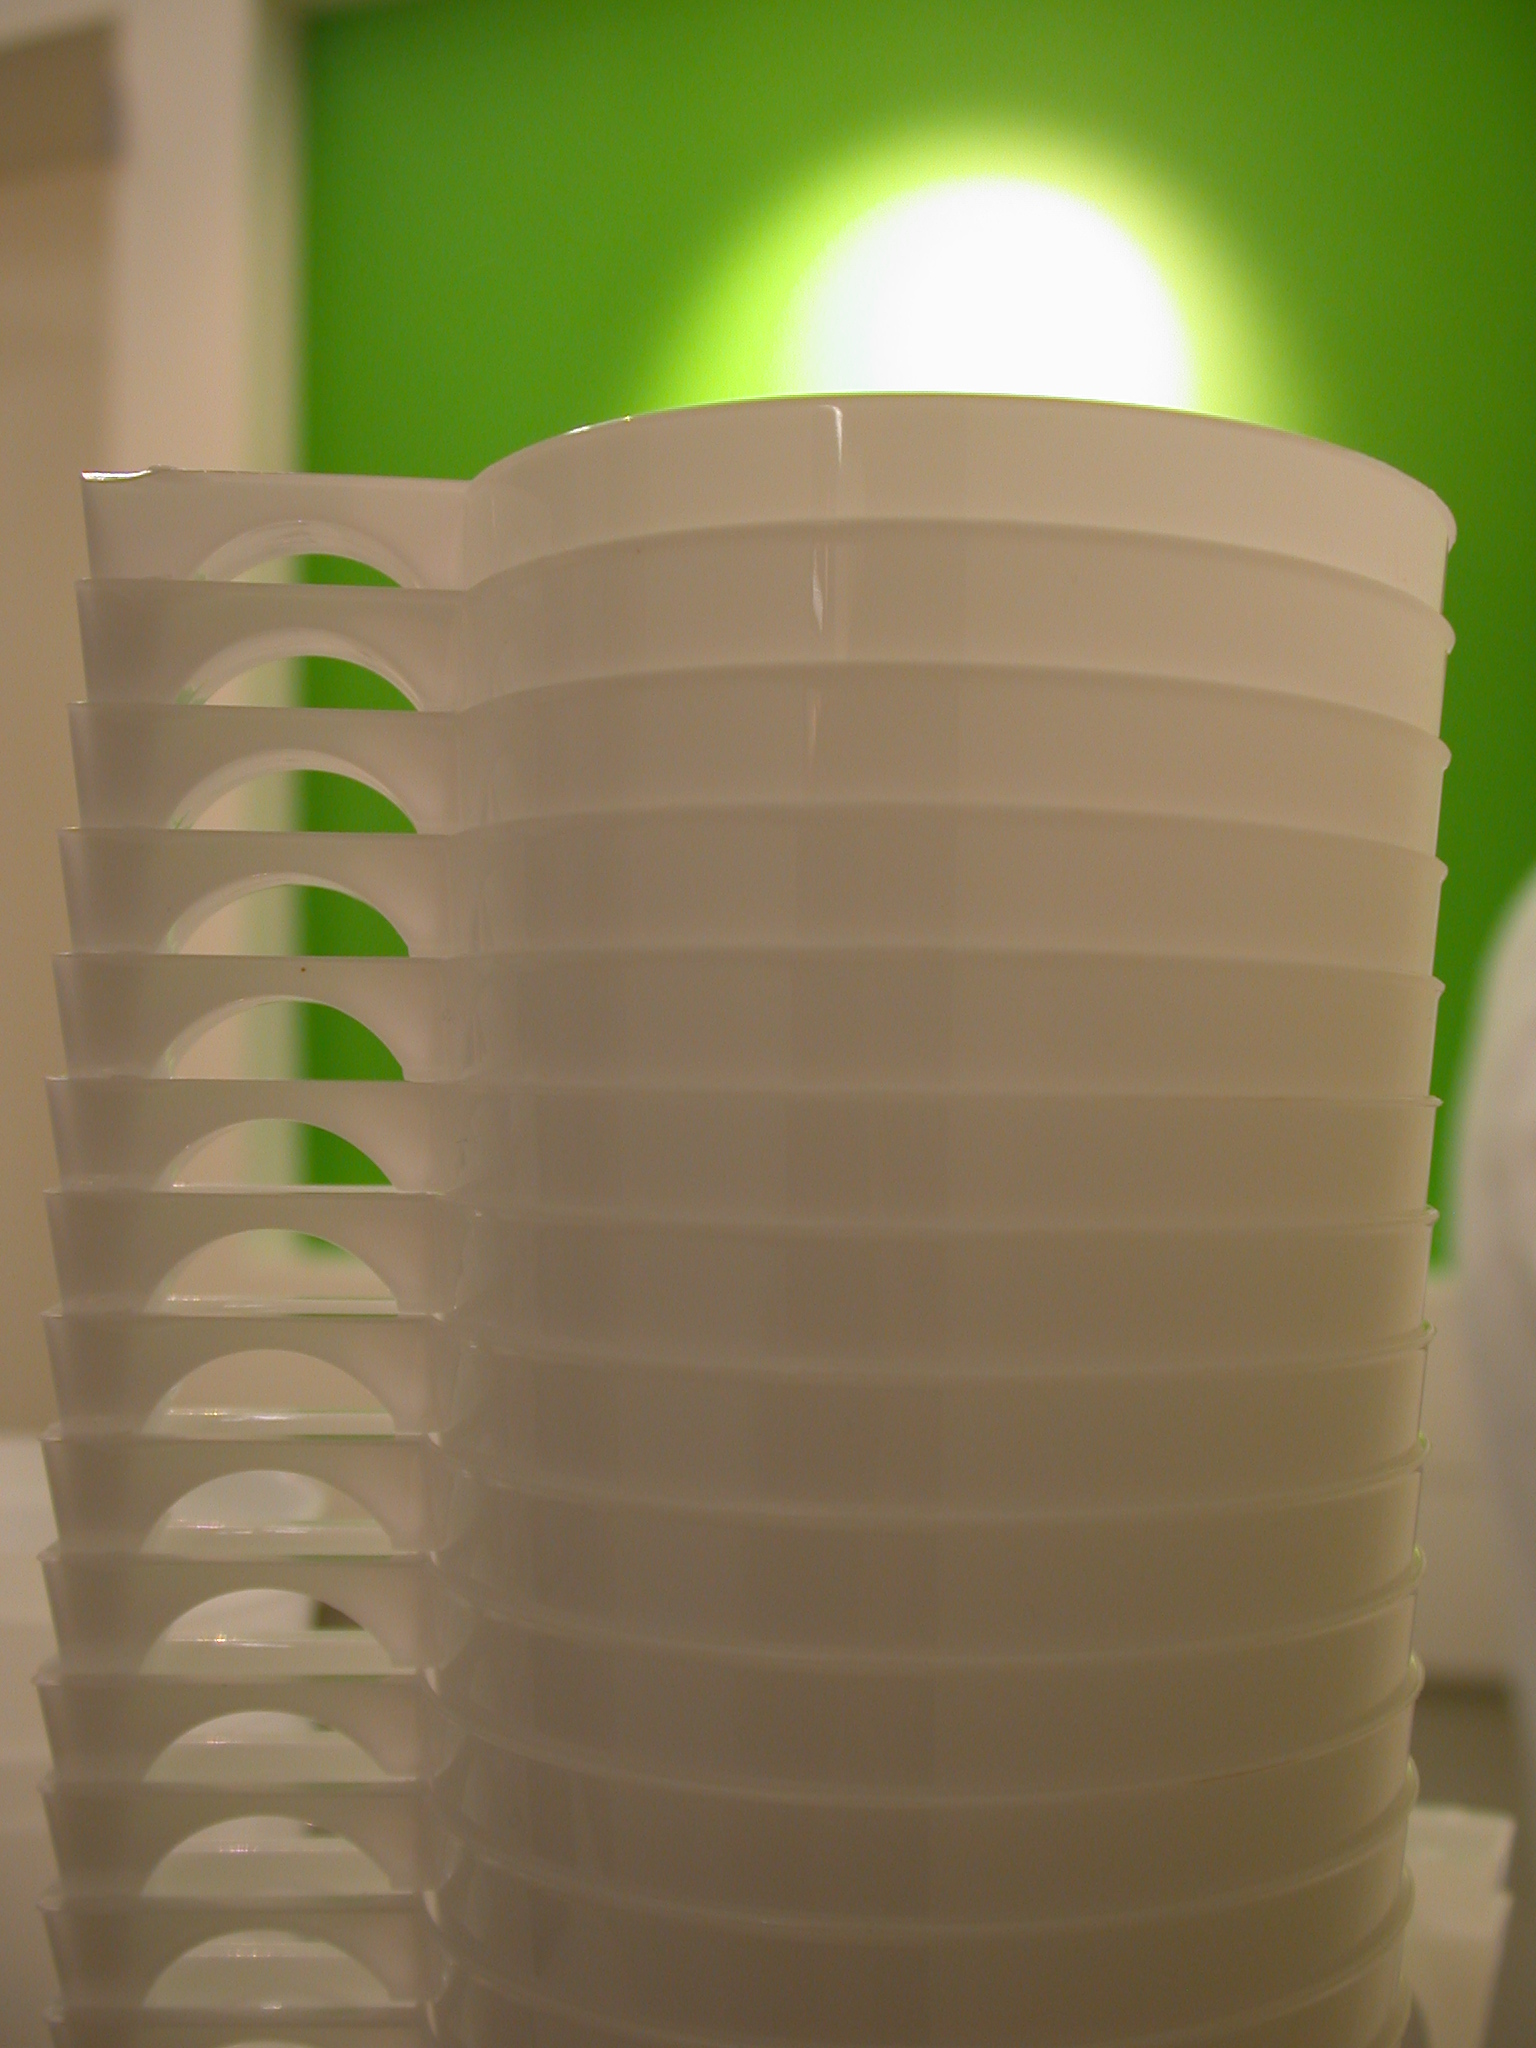 plastic cup cups stack stacked drinking recepticle white green light